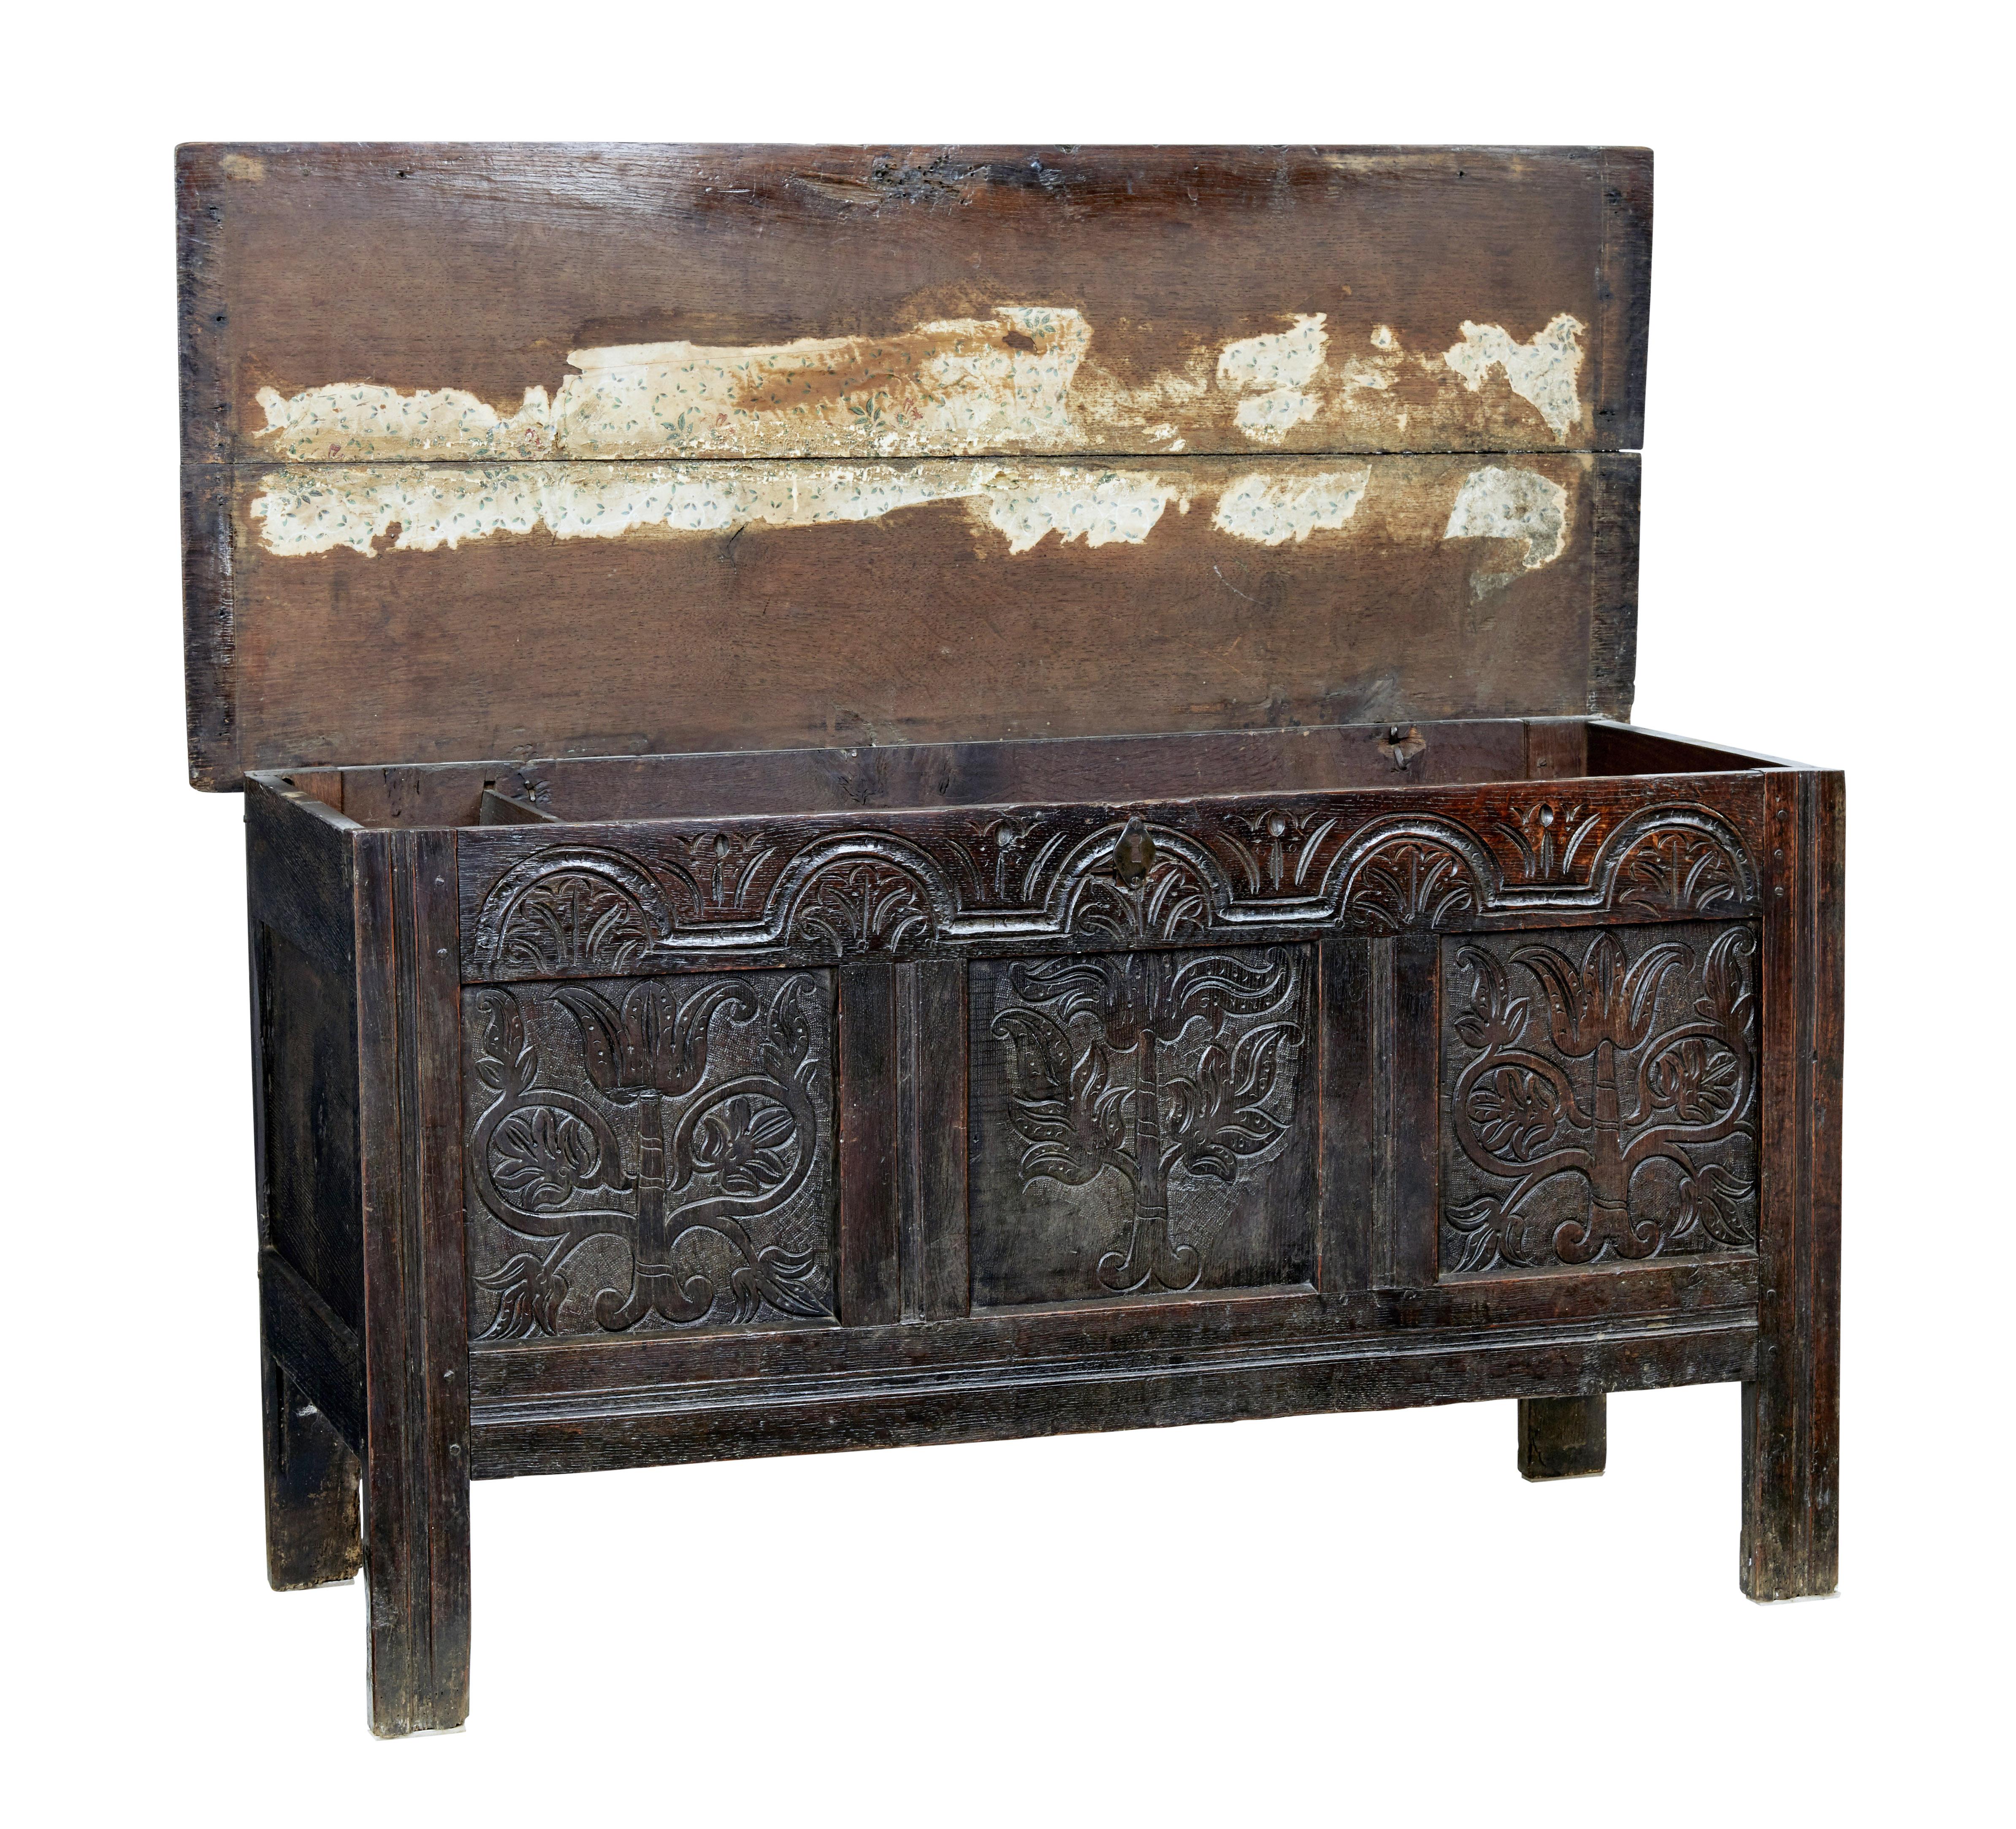 Late 17th century carved oak coffer circa 1680.

Good quality coffer of large proportions. Carved panelled front with florals and arches. Standing on plank legs, still maintaining their original length.

2 plank top with original hinges. Lid